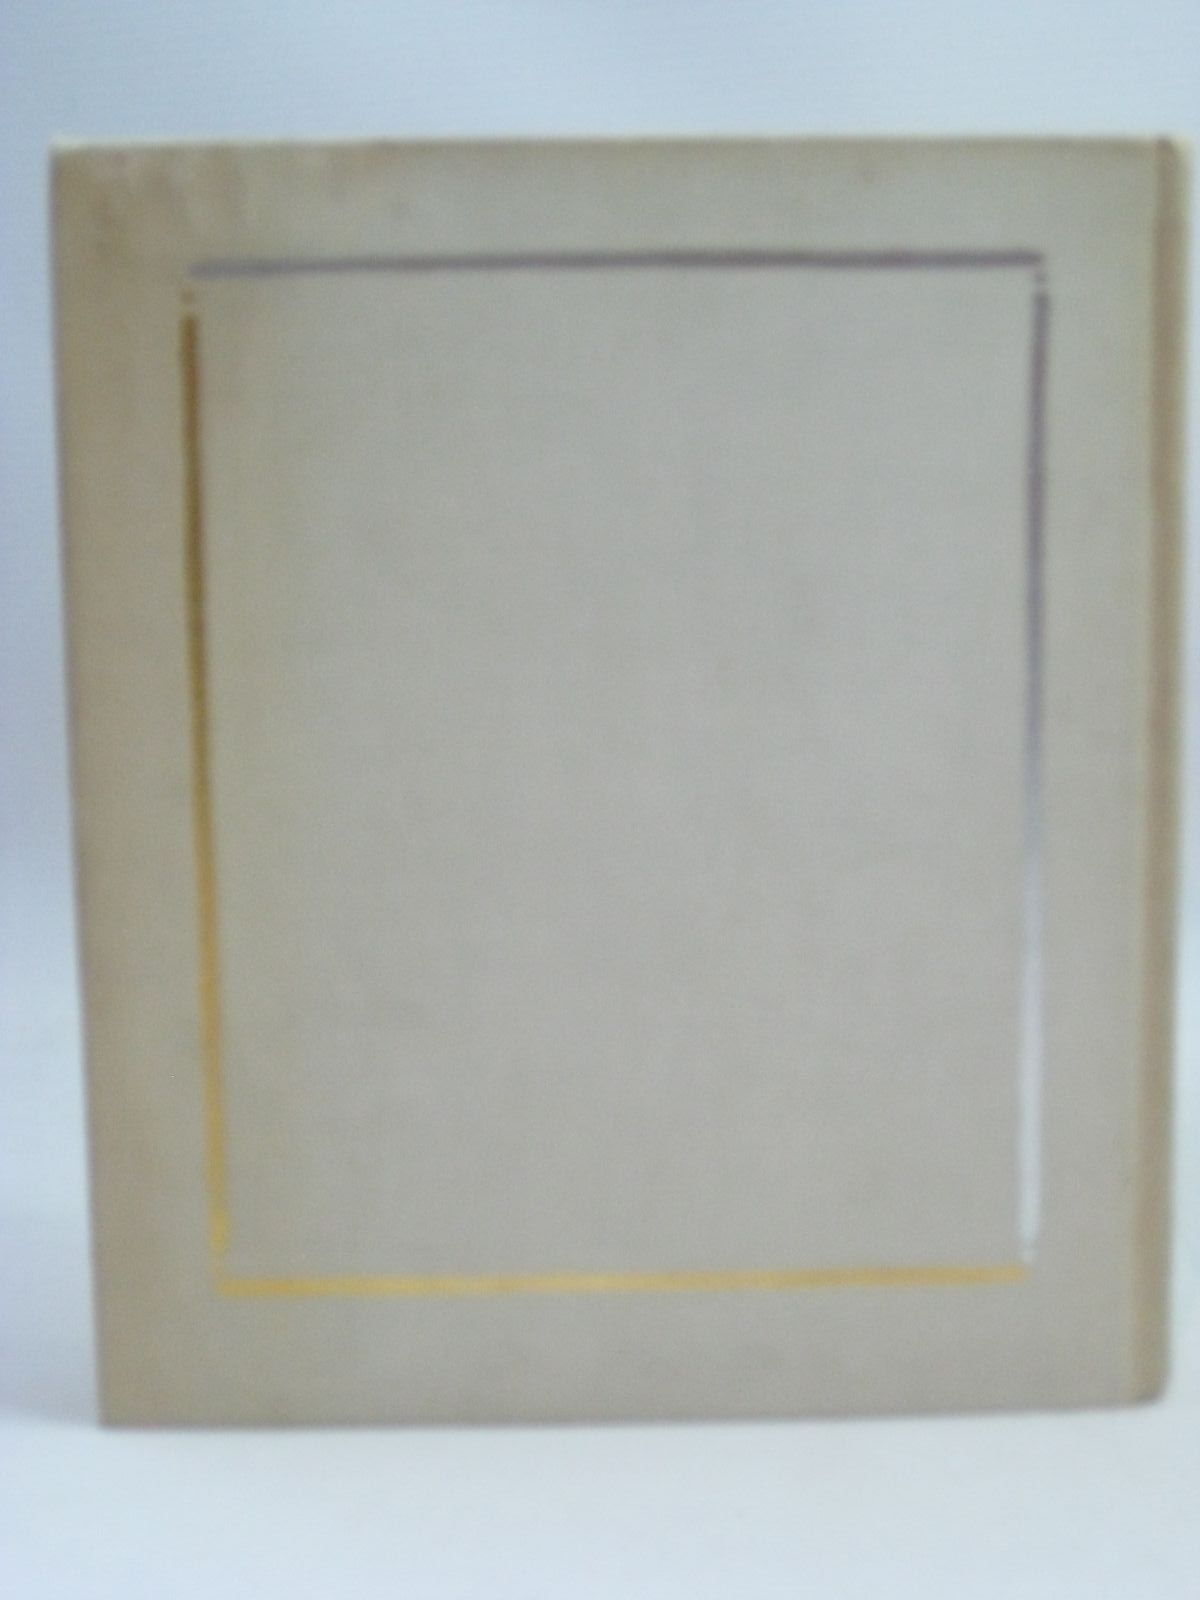 Photo of SILVER AND GOLD written by Blyton, Enid illustrated by Everett, Ethel F. published by Thomas Nelson and Sons Ltd. (STOCK CODE: 1506116)  for sale by Stella & Rose's Books